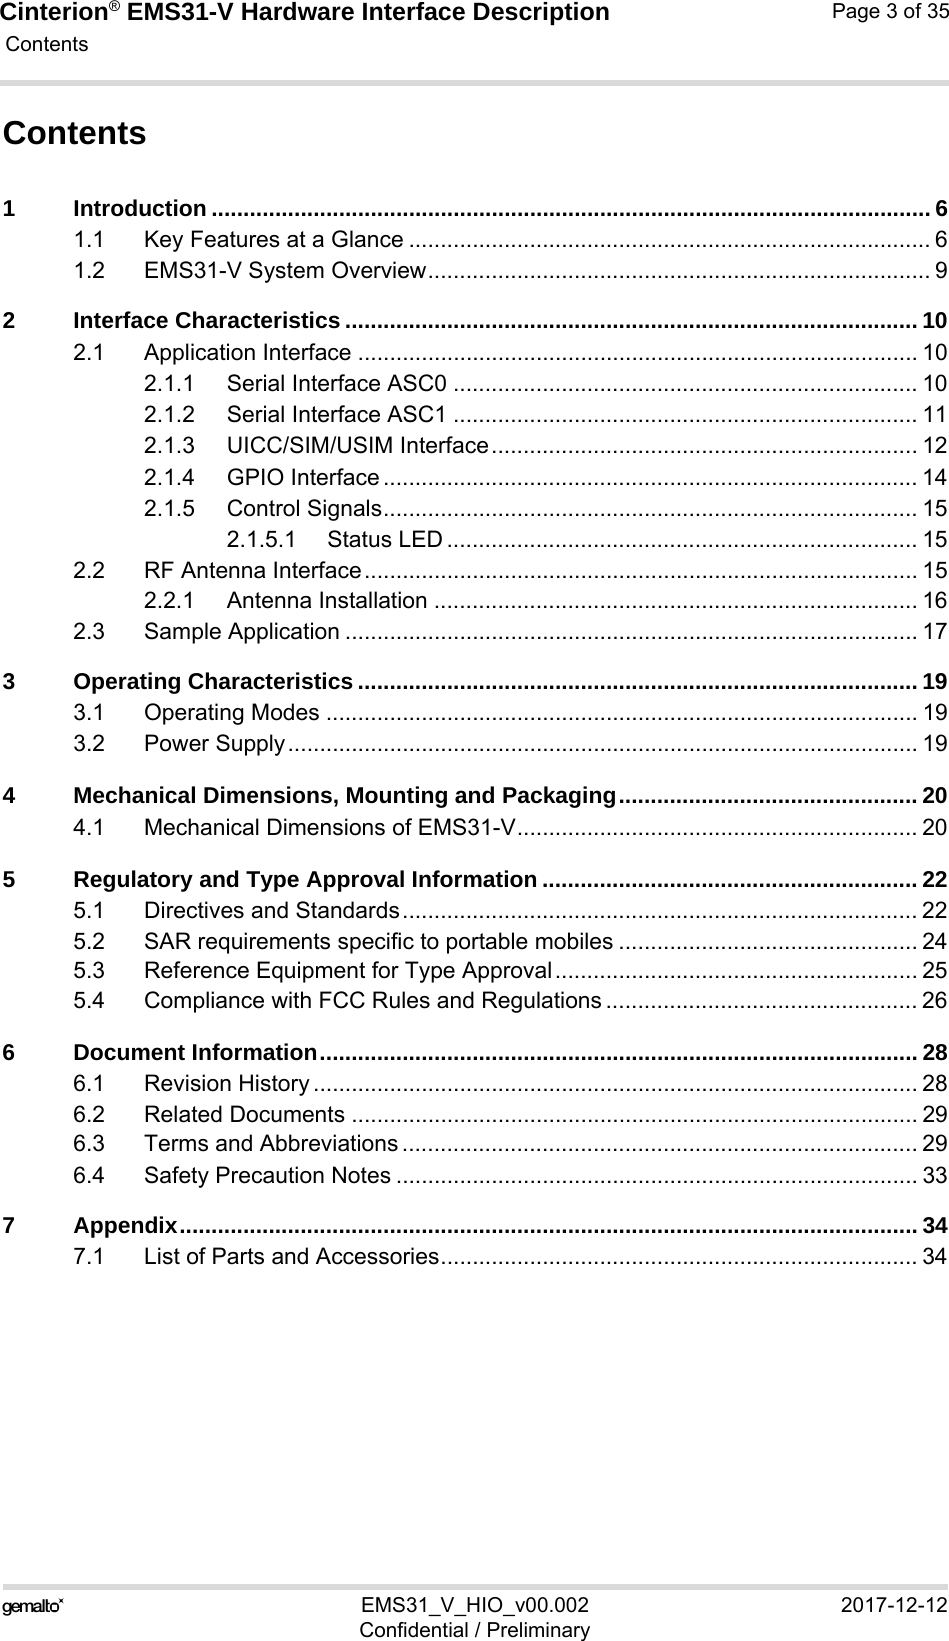 Cinterion® EMS31-V Hardware Interface Description Contents35EMS31_V_HIO_v00.002 2017-12-12Confidential / PreliminaryPage 3 of 35Contents1 Introduction ................................................................................................................. 61.1 Key Features at a Glance .................................................................................. 61.2 EMS31-V System Overview............................................................................... 92 Interface Characteristics .......................................................................................... 102.1 Application Interface ........................................................................................ 102.1.1 Serial Interface ASC0 ......................................................................... 102.1.2 Serial Interface ASC1 ......................................................................... 112.1.3 UICC/SIM/USIM Interface................................................................... 122.1.4 GPIO Interface .................................................................................... 142.1.5 Control Signals.................................................................................... 152.1.5.1 Status LED .......................................................................... 152.2 RF Antenna Interface....................................................................................... 152.2.1 Antenna Installation ............................................................................ 162.3 Sample Application .......................................................................................... 173 Operating Characteristics ........................................................................................ 193.1 Operating Modes ............................................................................................. 193.2 Power Supply................................................................................................... 194 Mechanical Dimensions, Mounting and Packaging............................................... 204.1 Mechanical Dimensions of EMS31-V............................................................... 205 Regulatory and Type Approval Information ........................................................... 225.1 Directives and Standards................................................................................. 225.2 SAR requirements specific to portable mobiles ............................................... 245.3 Reference Equipment for Type Approval......................................................... 255.4 Compliance with FCC Rules and Regulations ................................................. 266 Document Information.............................................................................................. 286.1 Revision History ............................................................................................... 286.2 Related Documents ......................................................................................... 296.3 Terms and Abbreviations ................................................................................. 296.4 Safety Precaution Notes .................................................................................. 337 Appendix.................................................................................................................... 347.1 List of Parts and Accessories........................................................................... 34